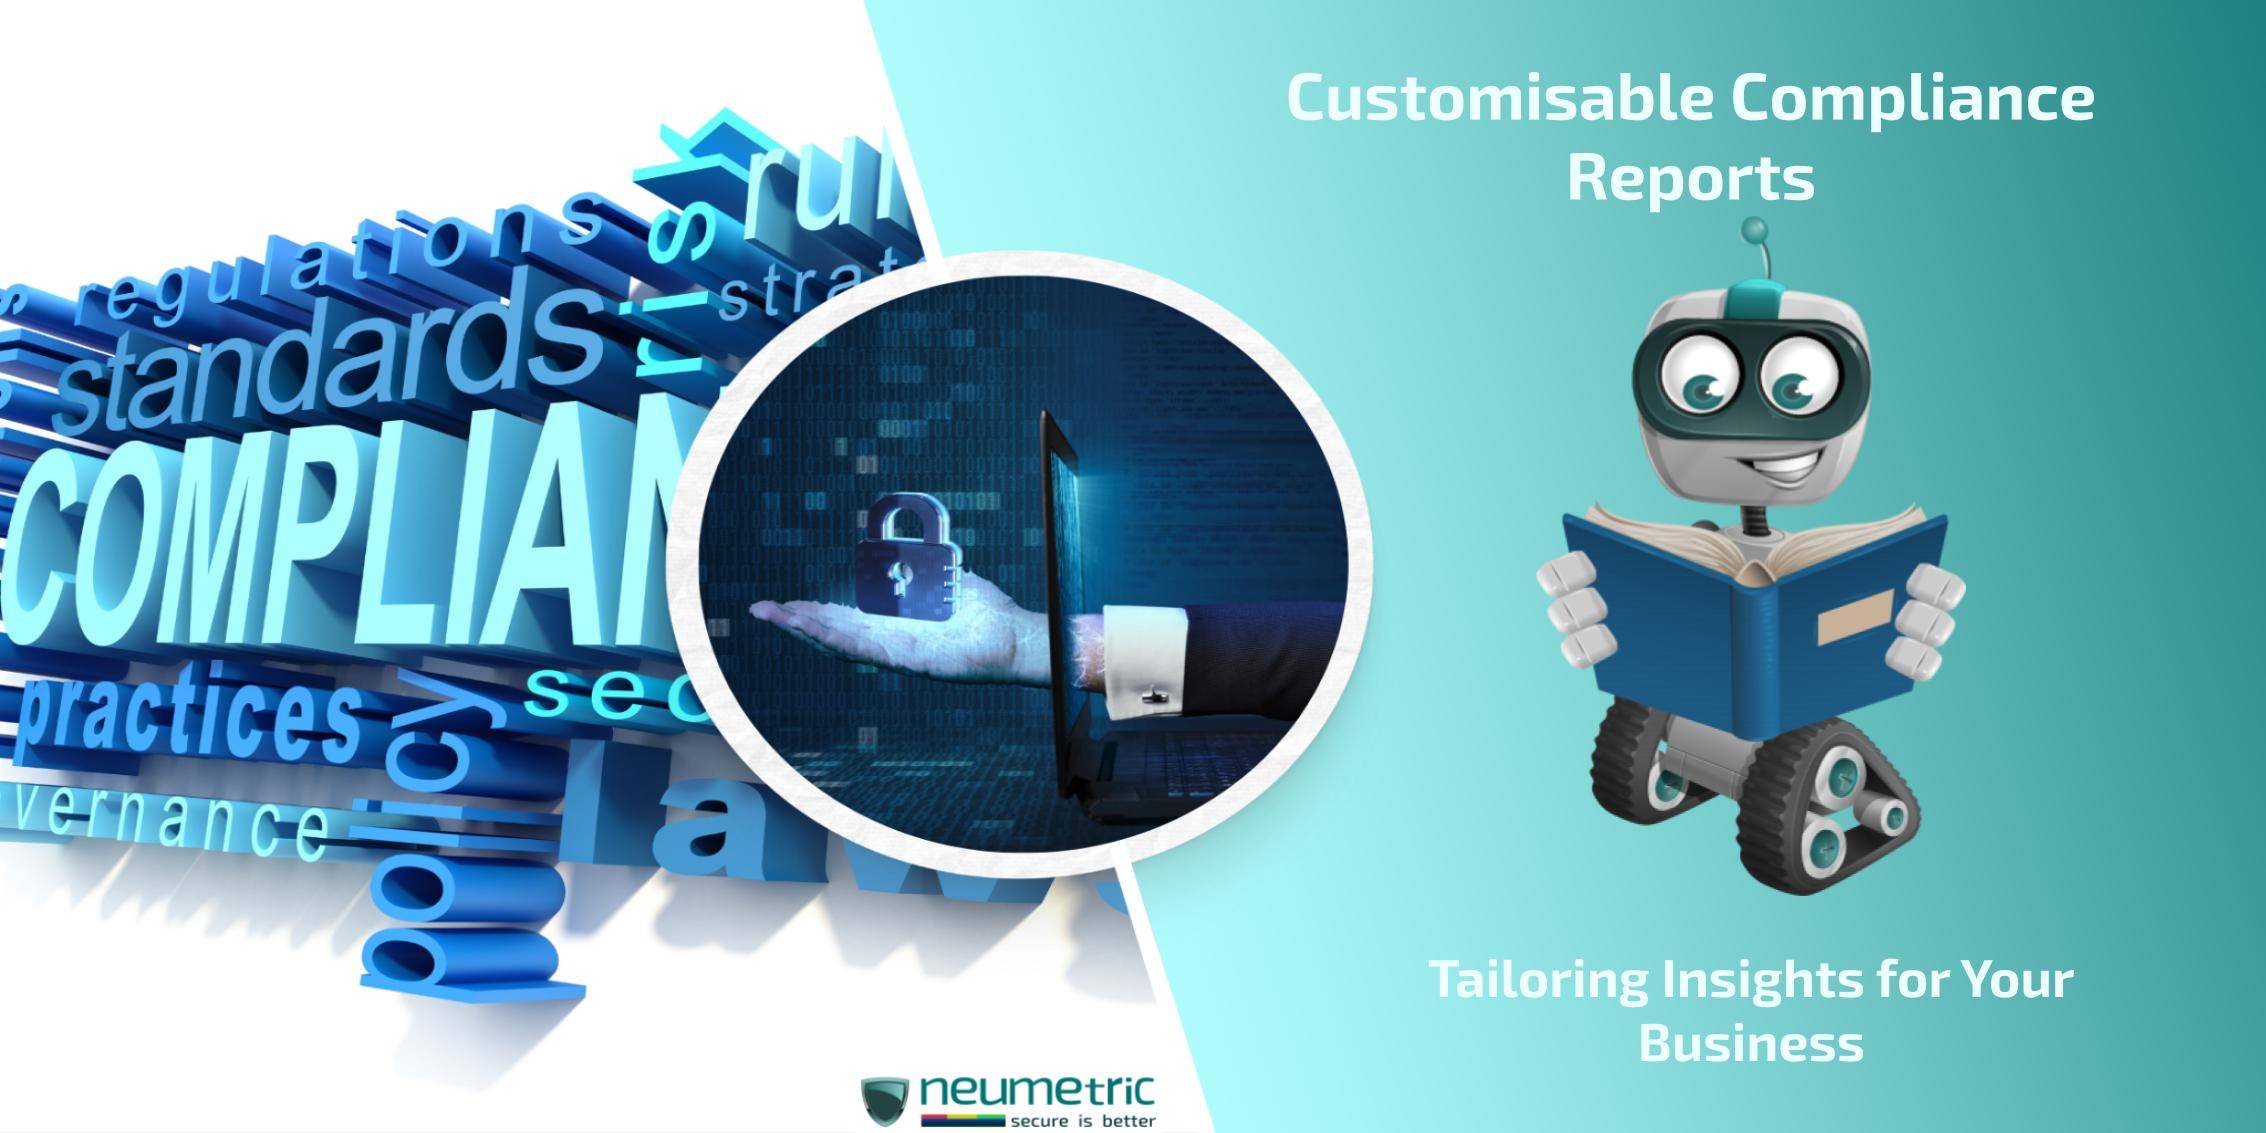 Customisable Compliance Reports